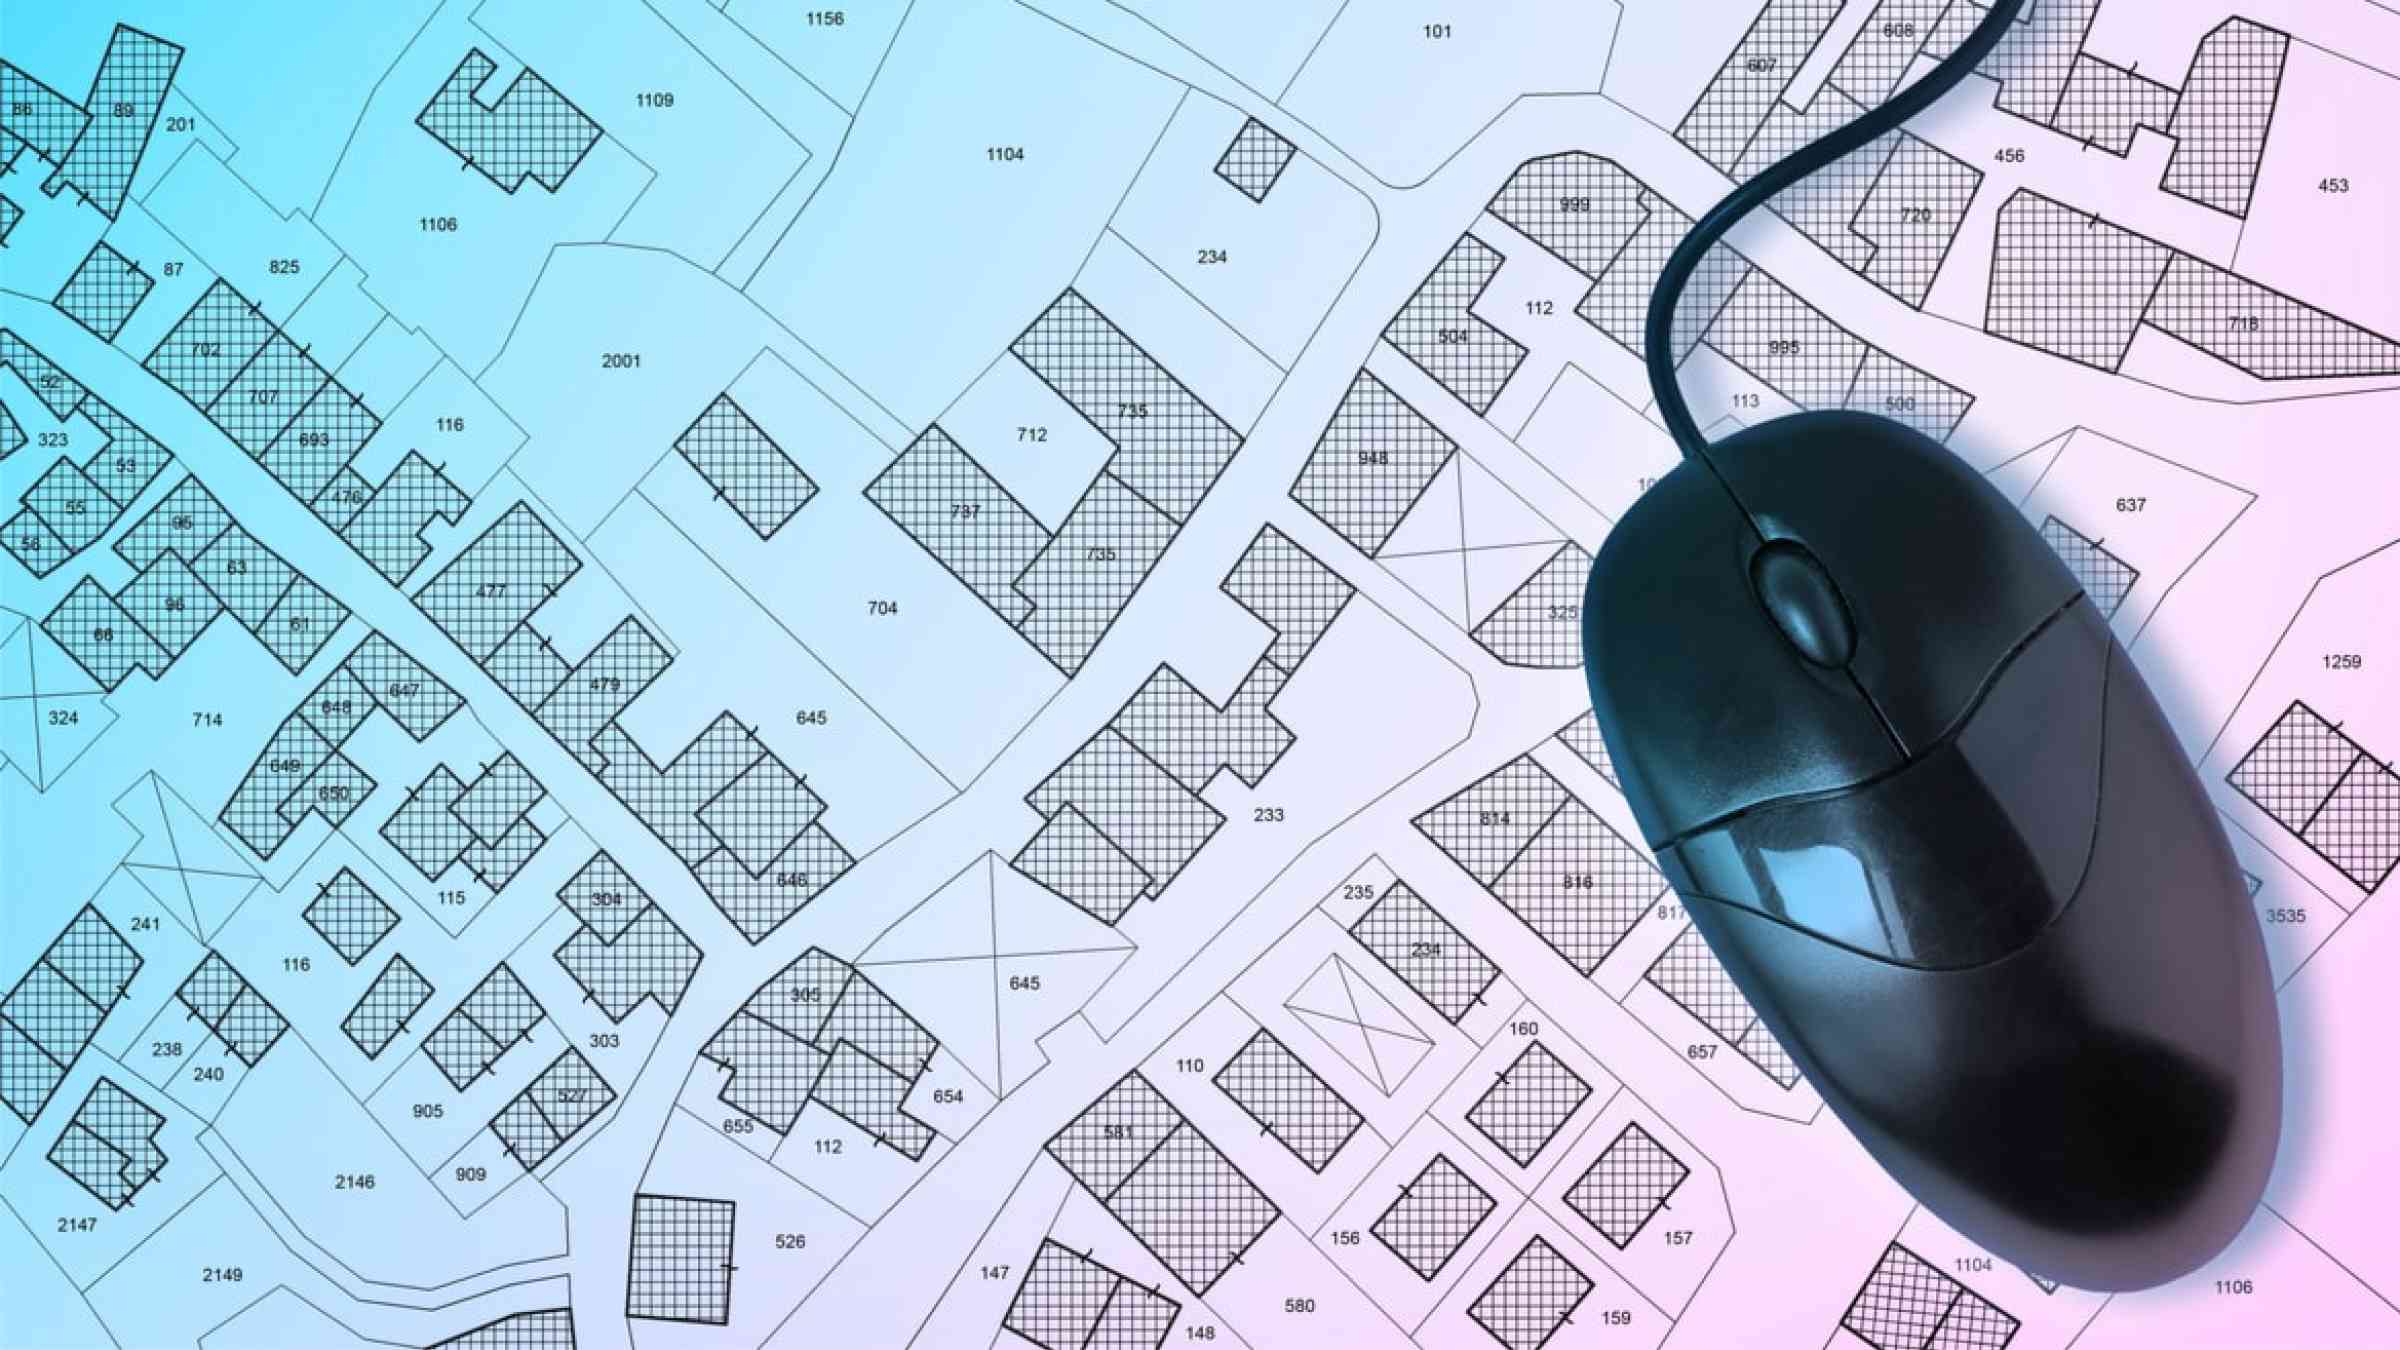 Computer mouse on urban planning map